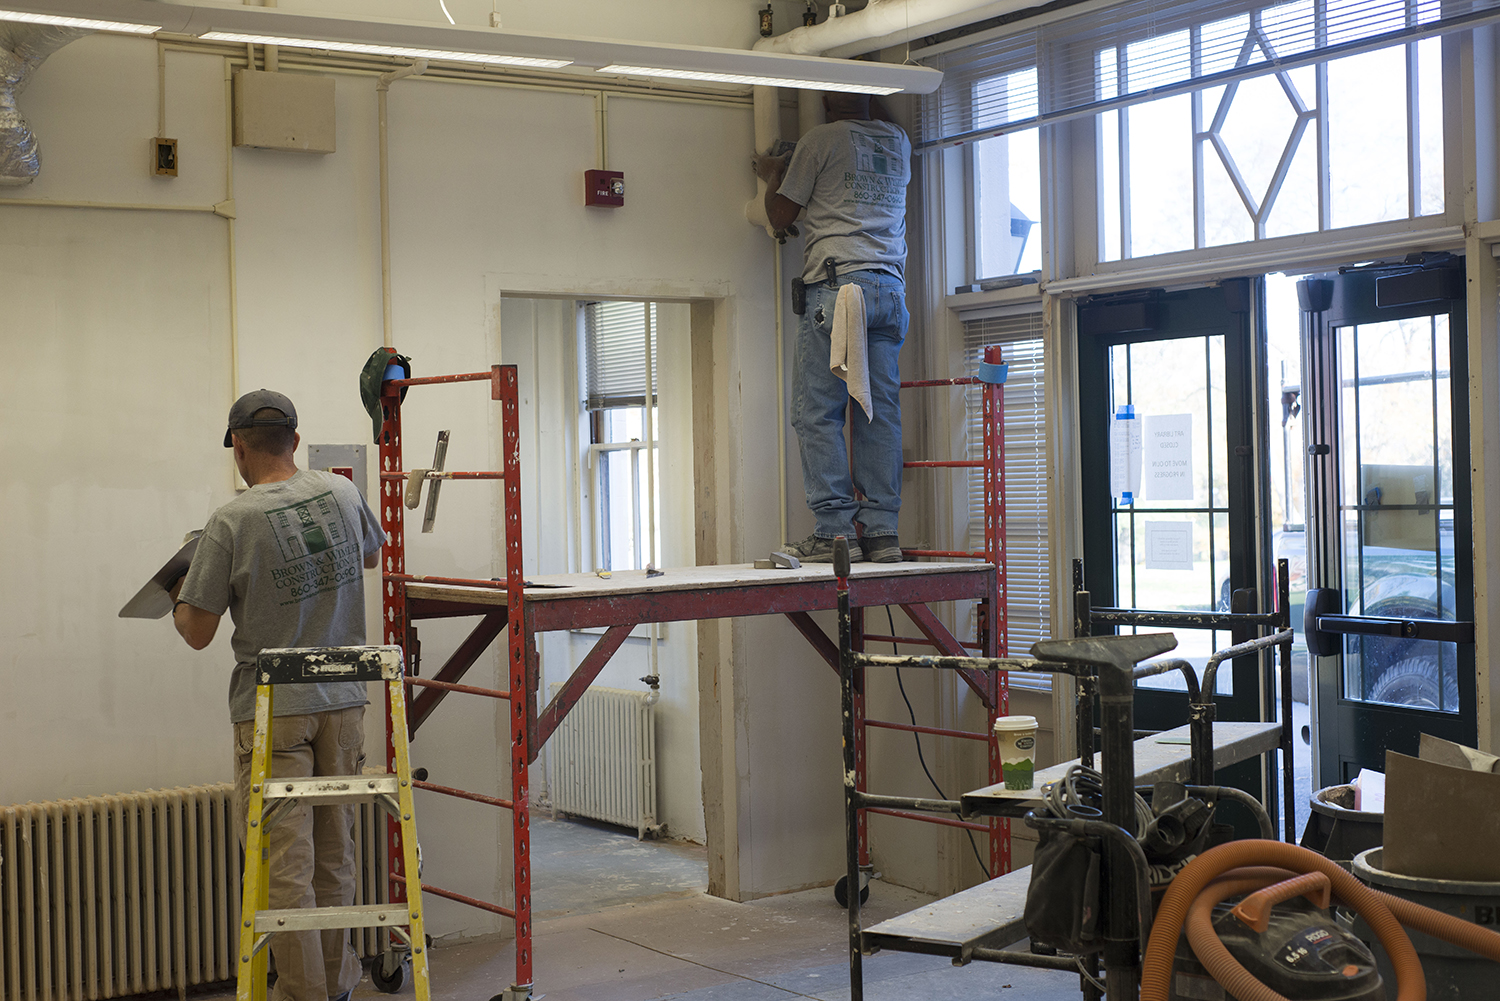 Contractors are working to restore and transform the Davison Art Center's carriage house section into a Digital Design Studio. The space formerly housed the Art Library